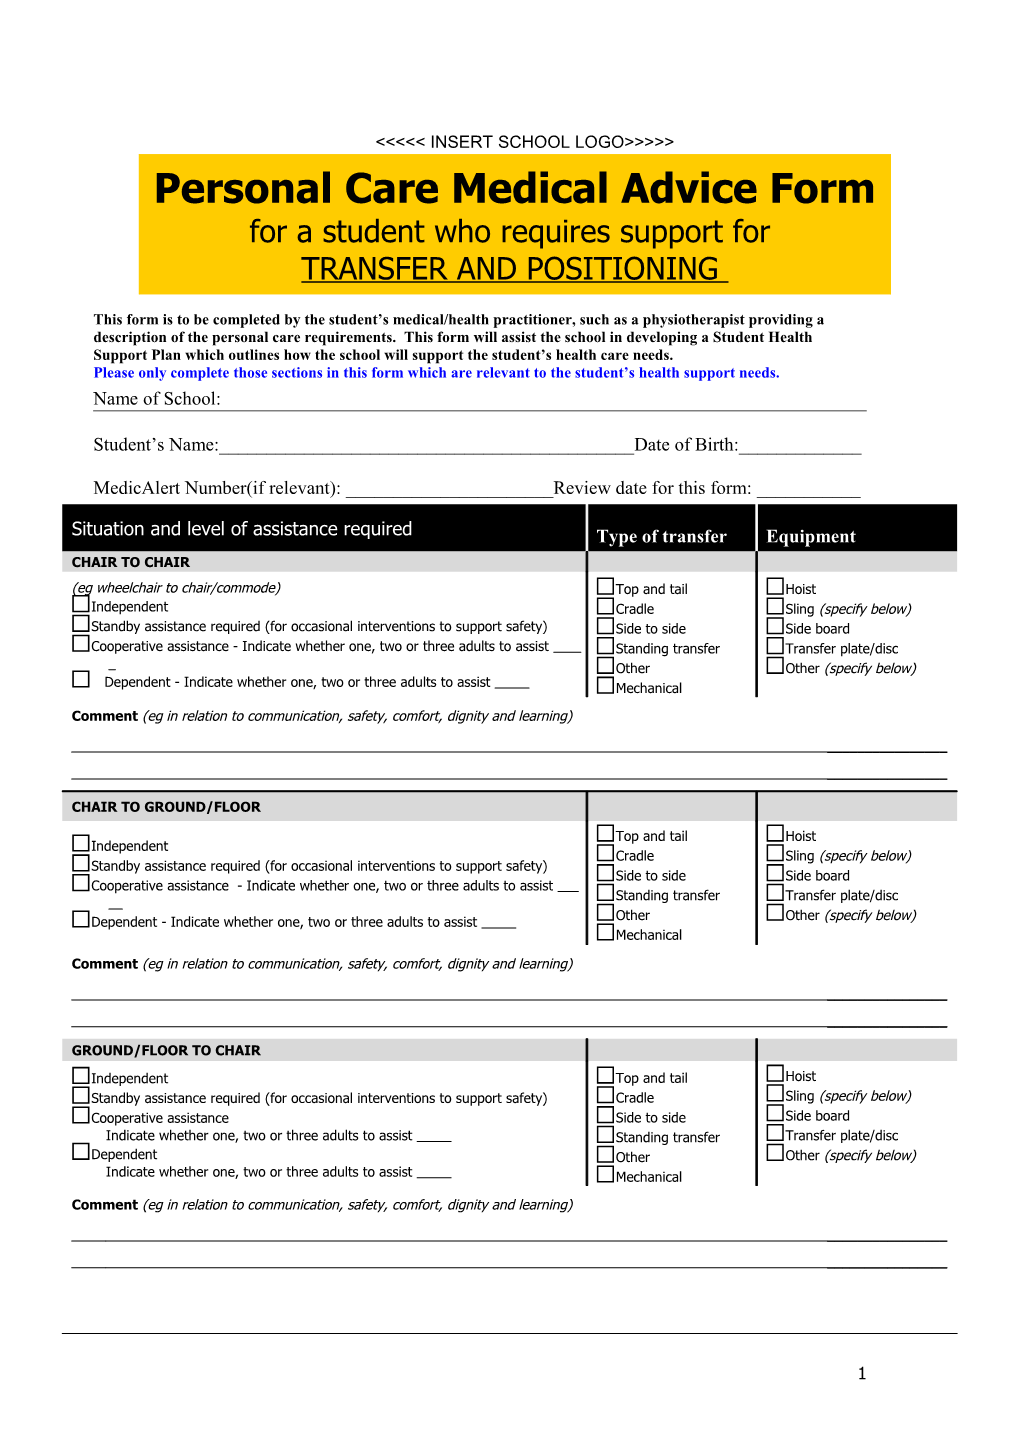 Personal Care Medical Advice Form for Students Requiring Support for Transfer and Positions